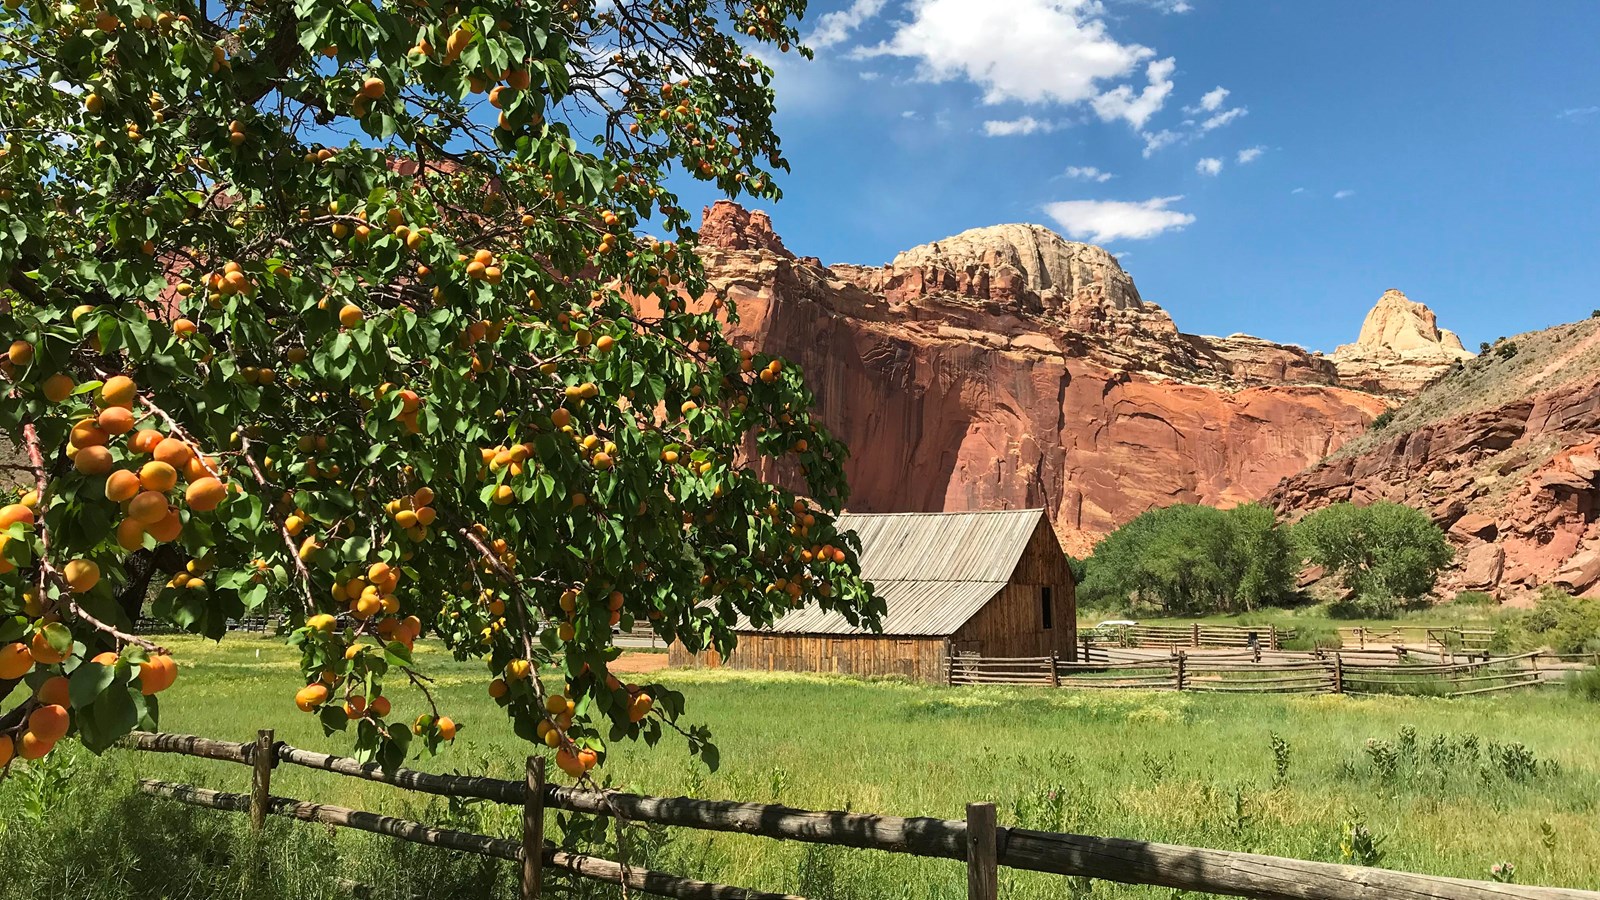 apricots on a tree. An old barn and red cliffs in the background